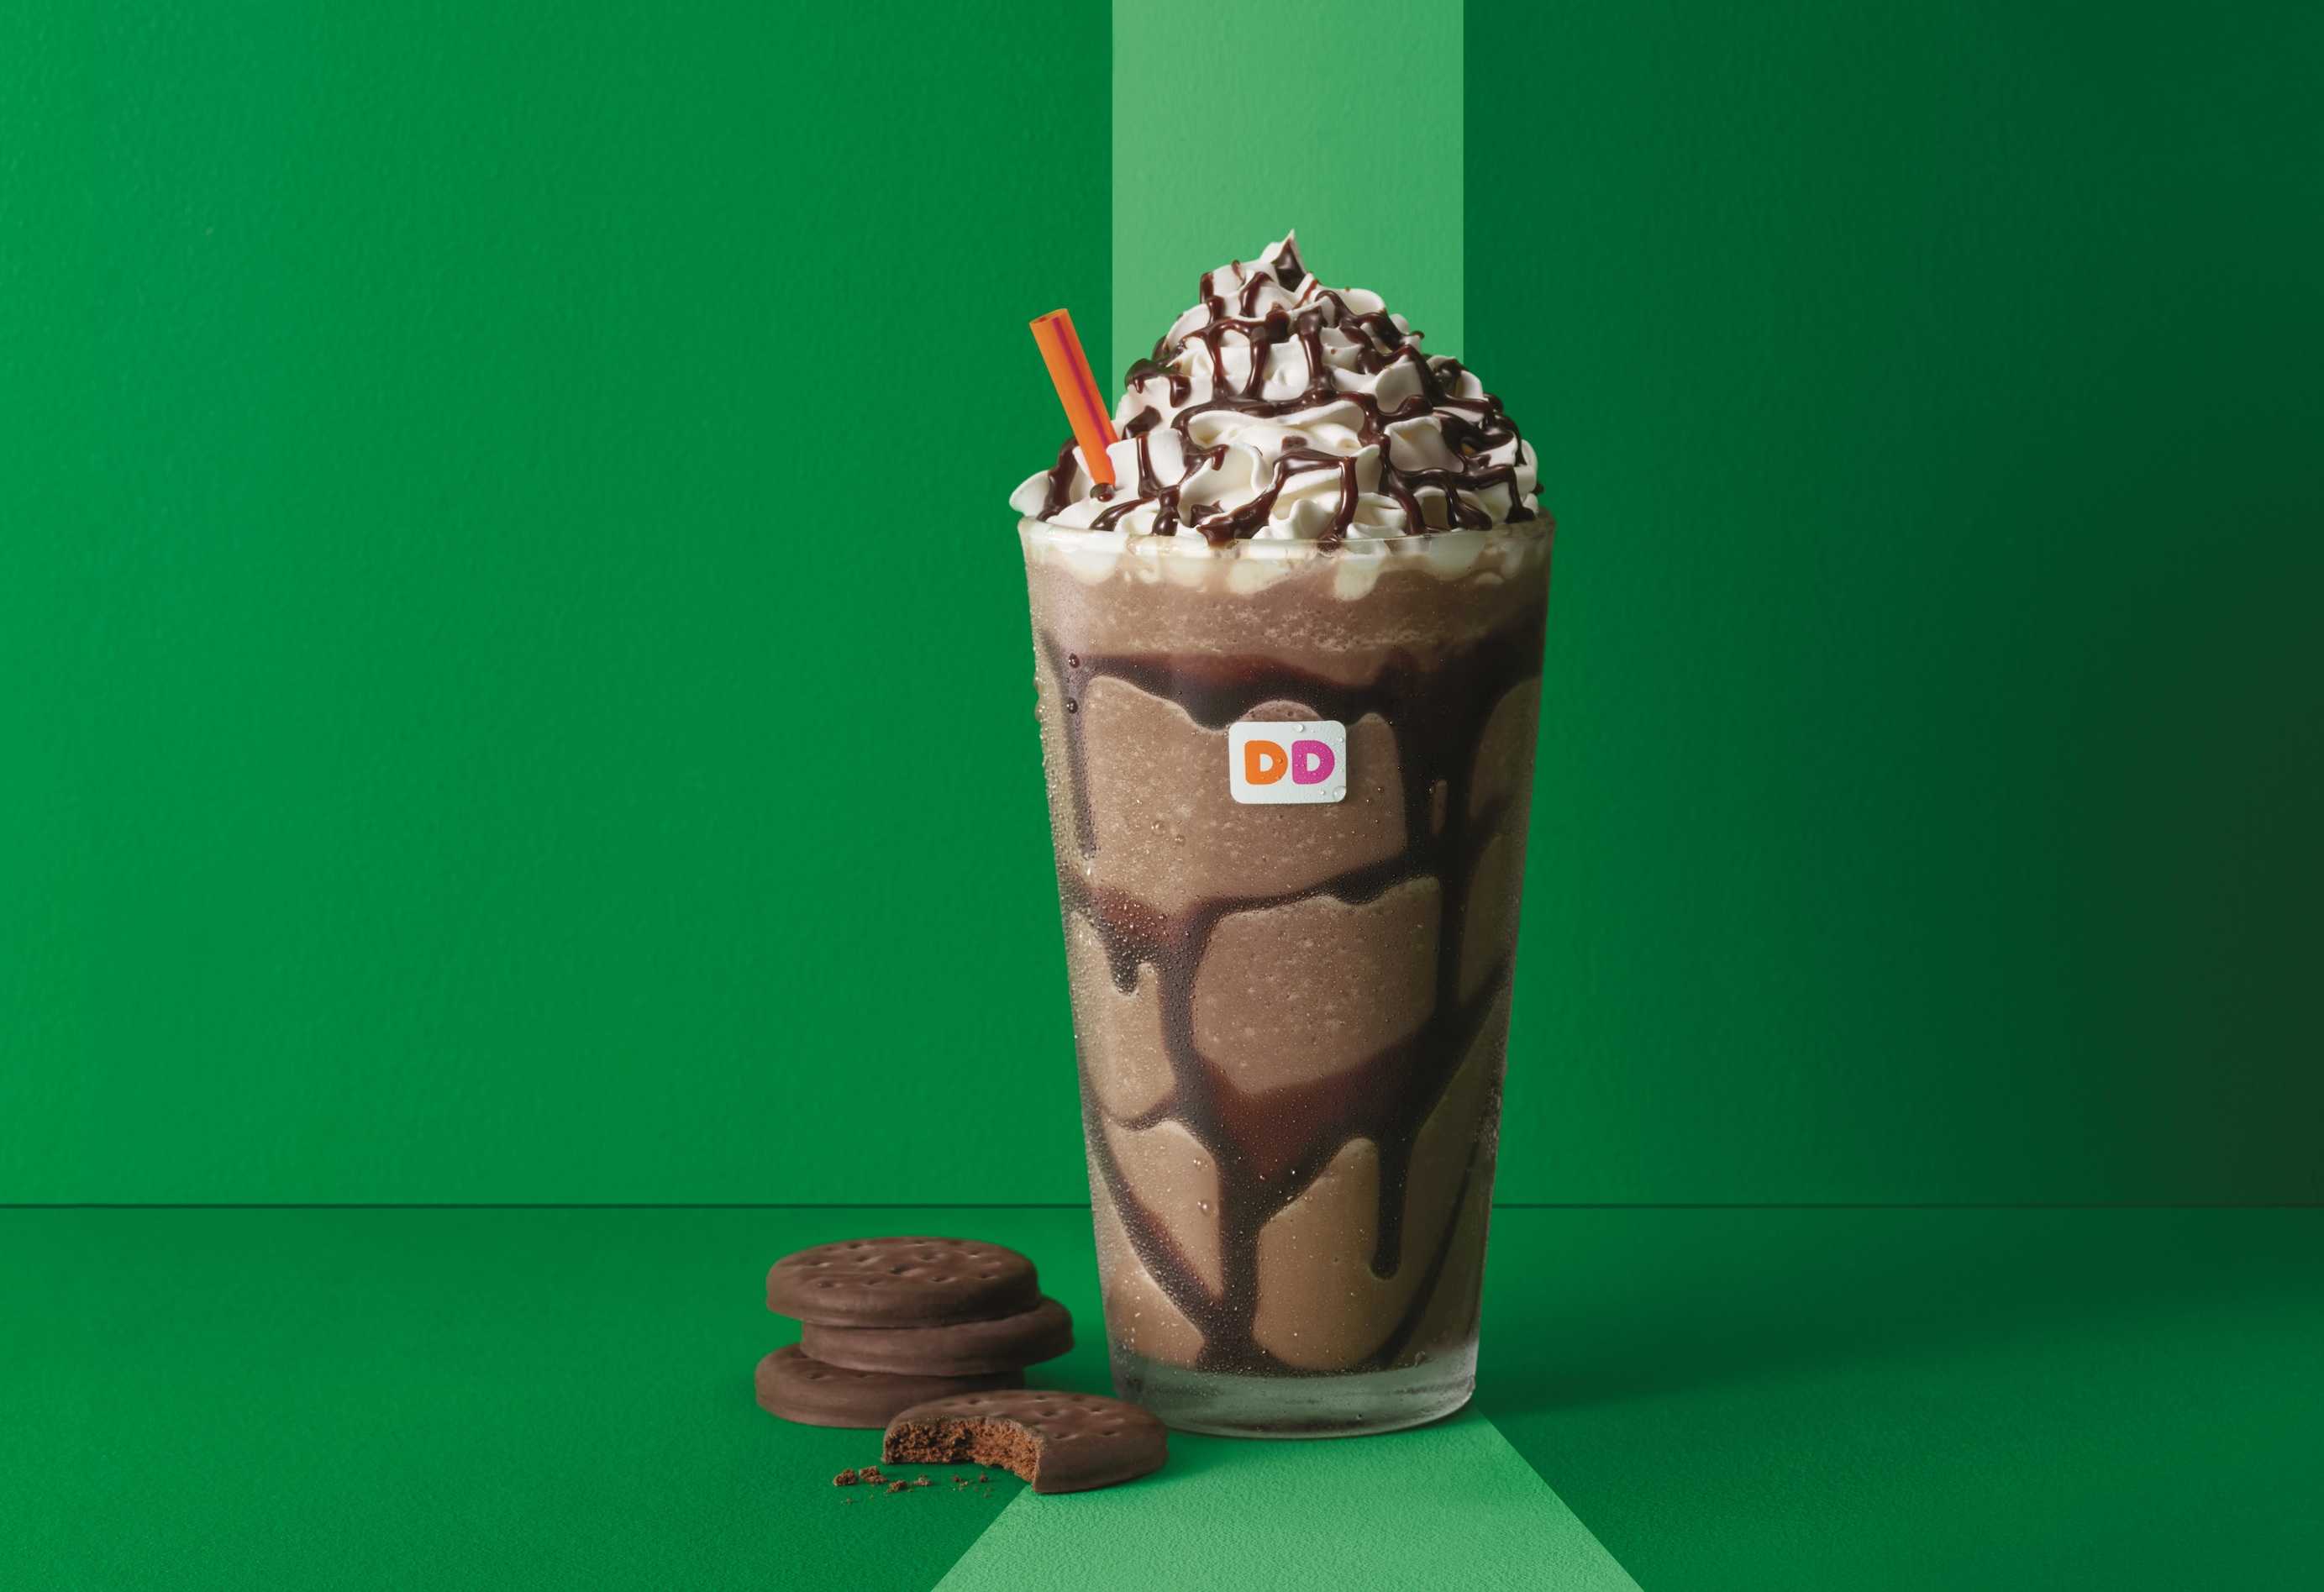 Dunkin' Donuts just dropped a Girl Scout-inspired menu